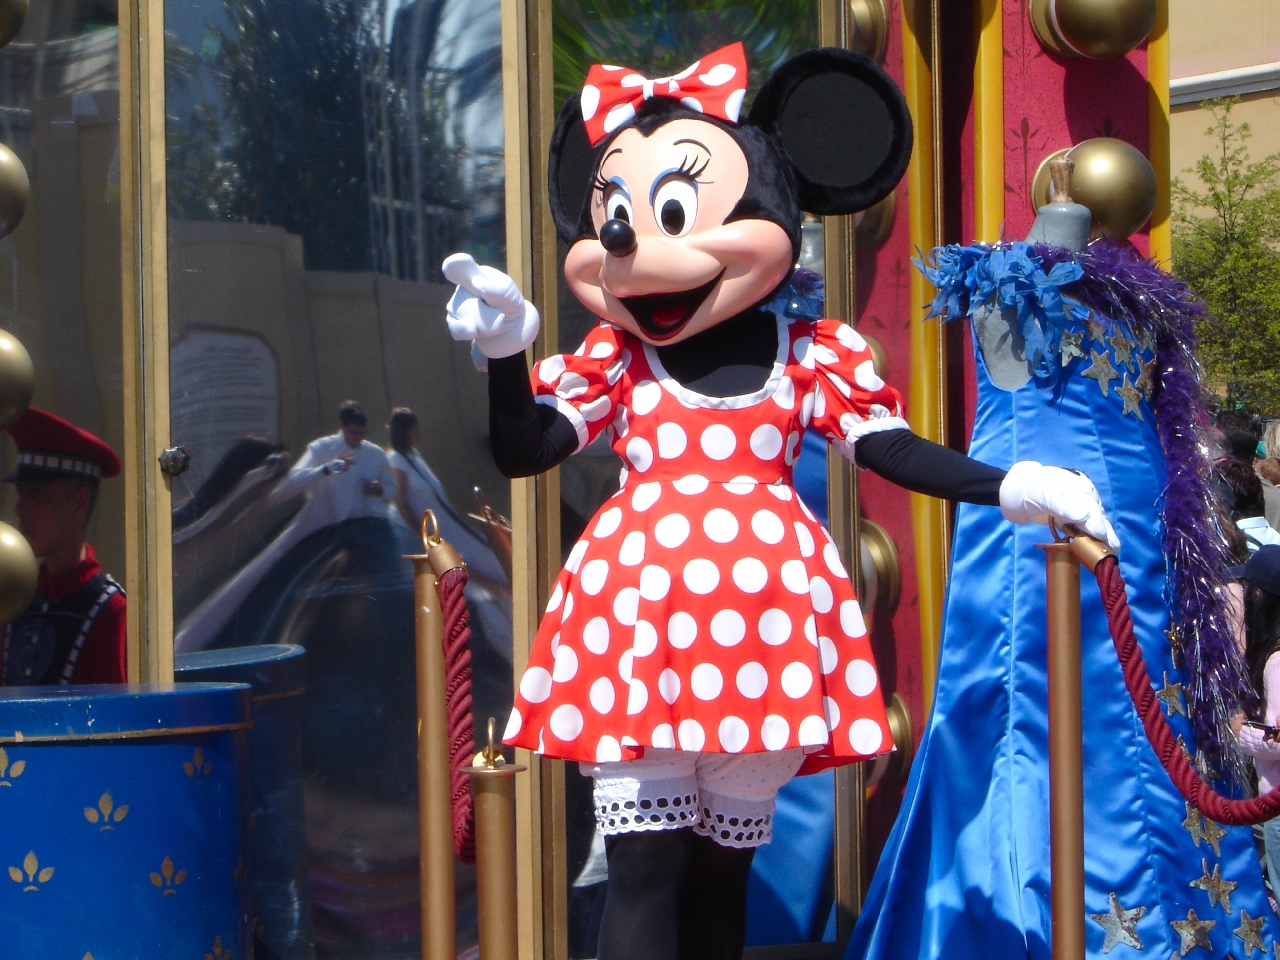 Minnie Mouse in a polkadot dress pointing